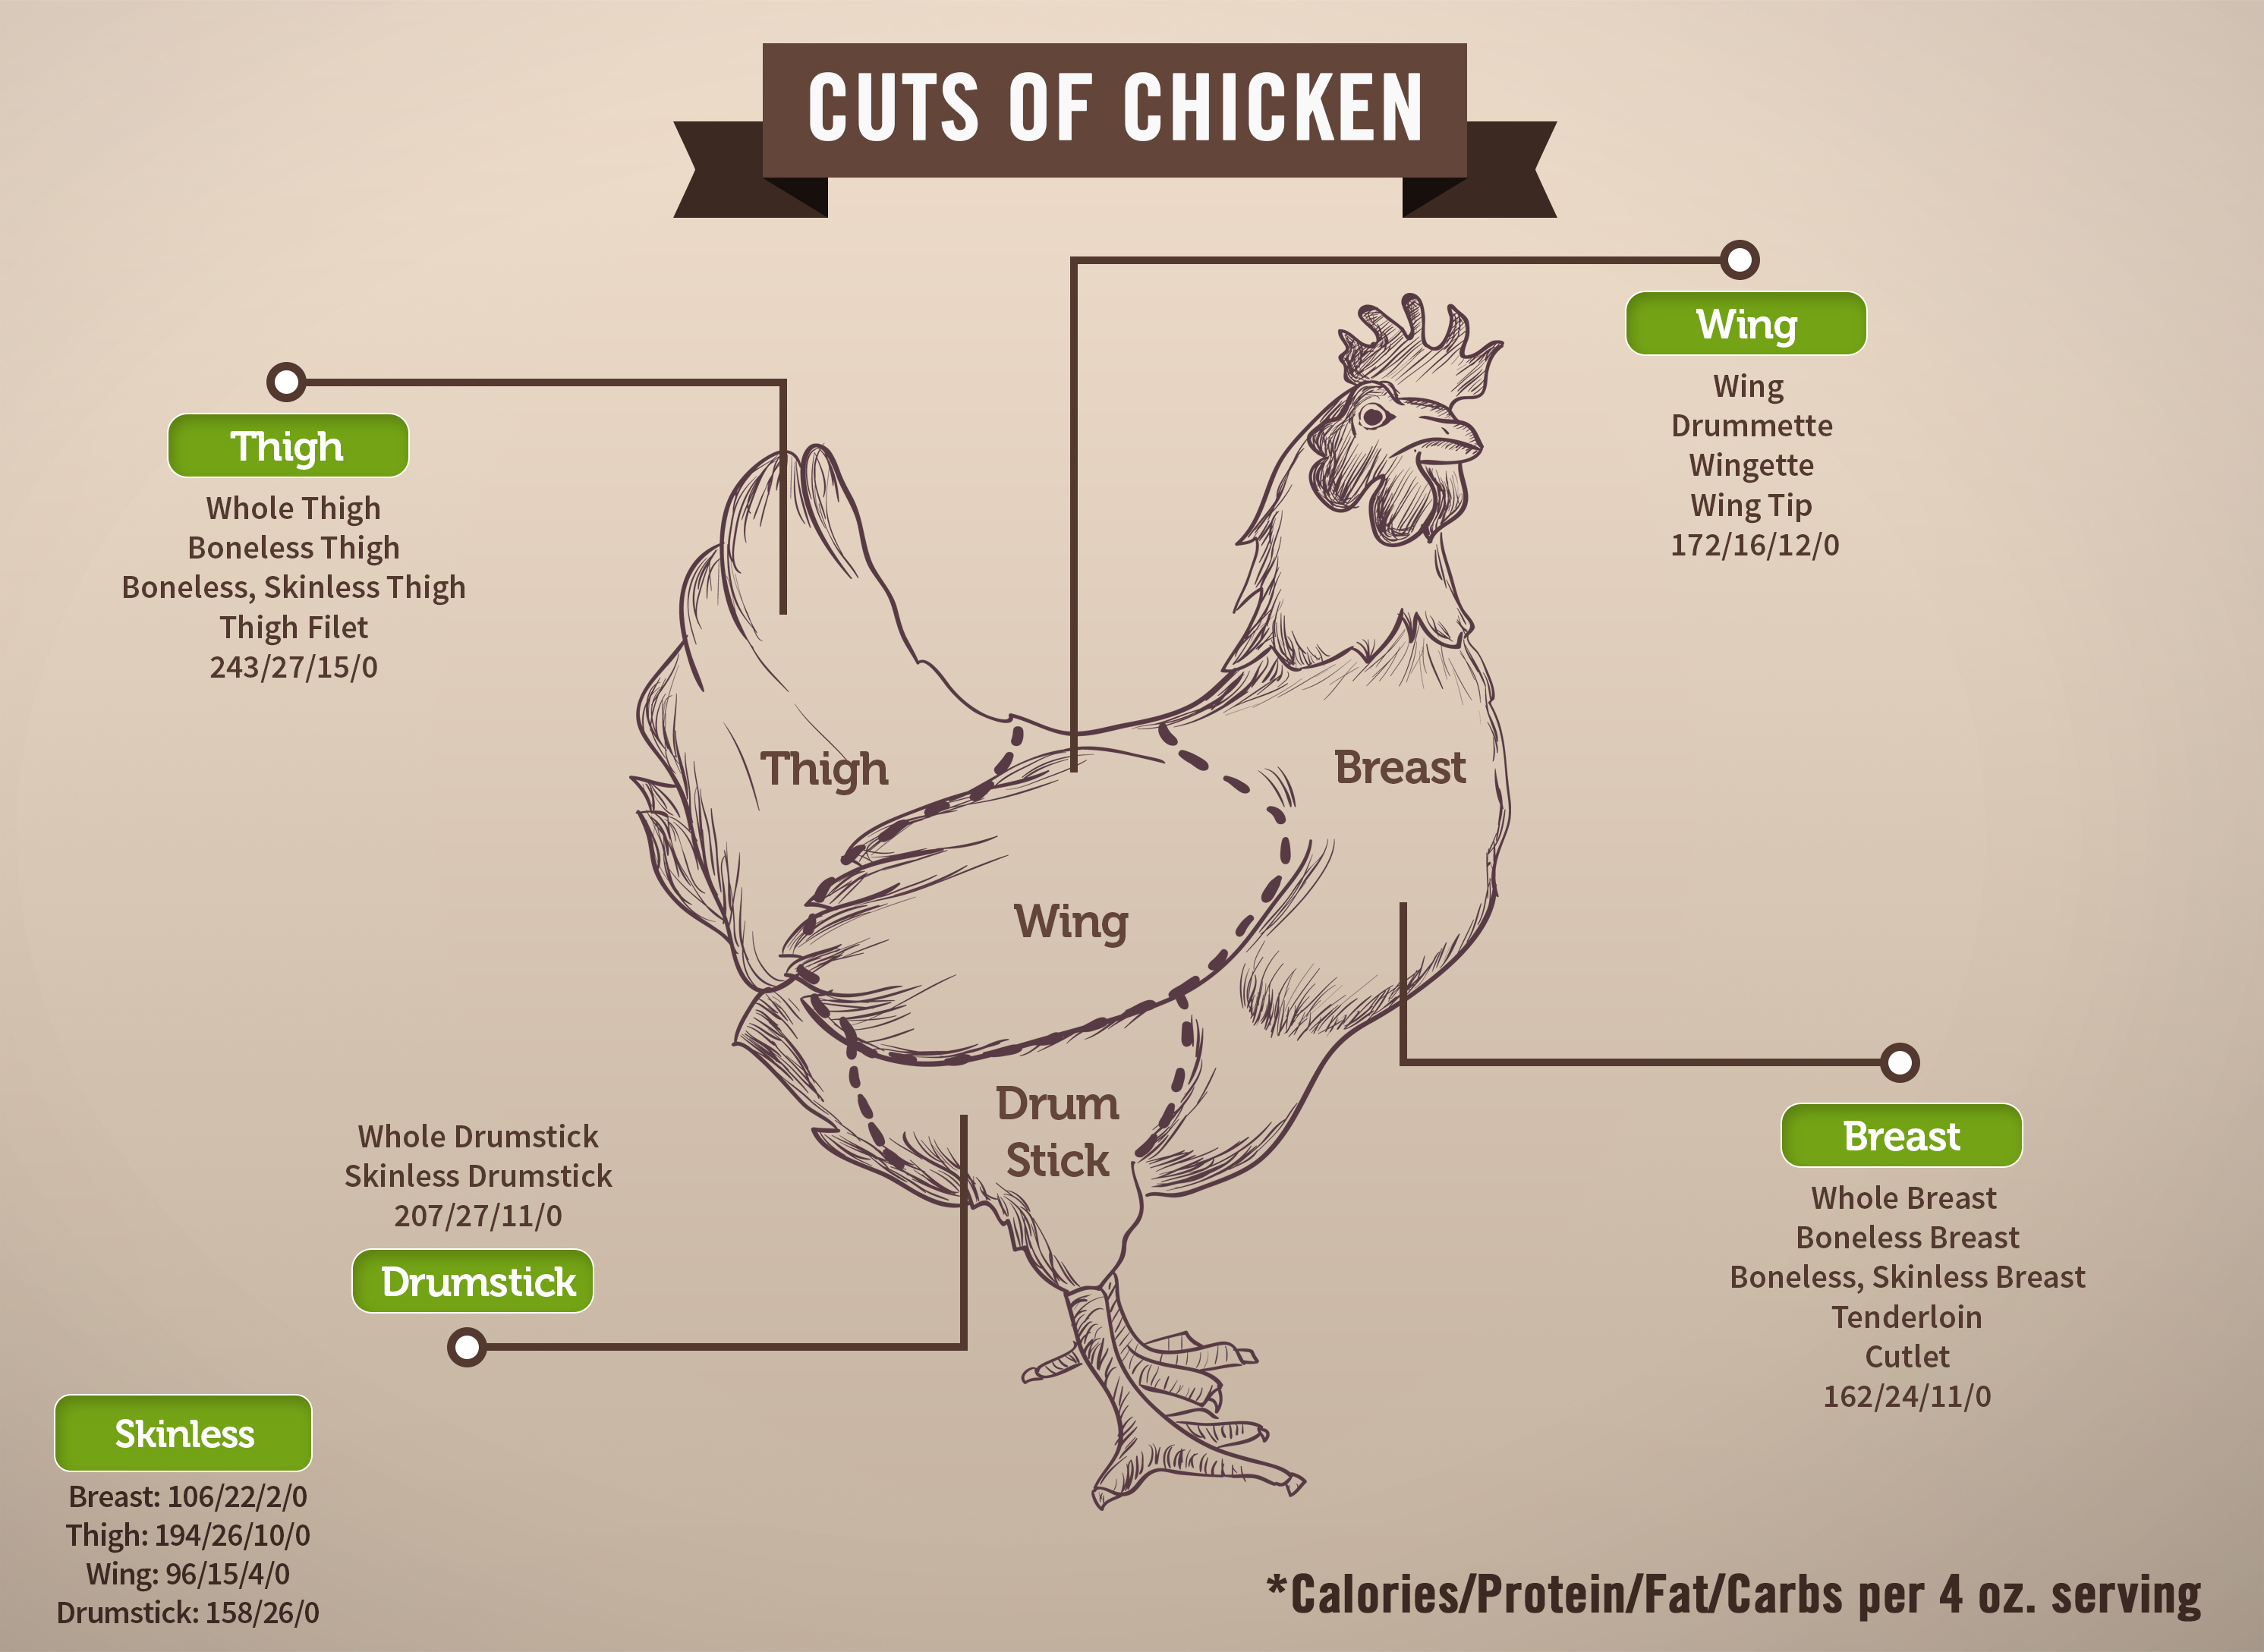 Macros in different cuts of chicken